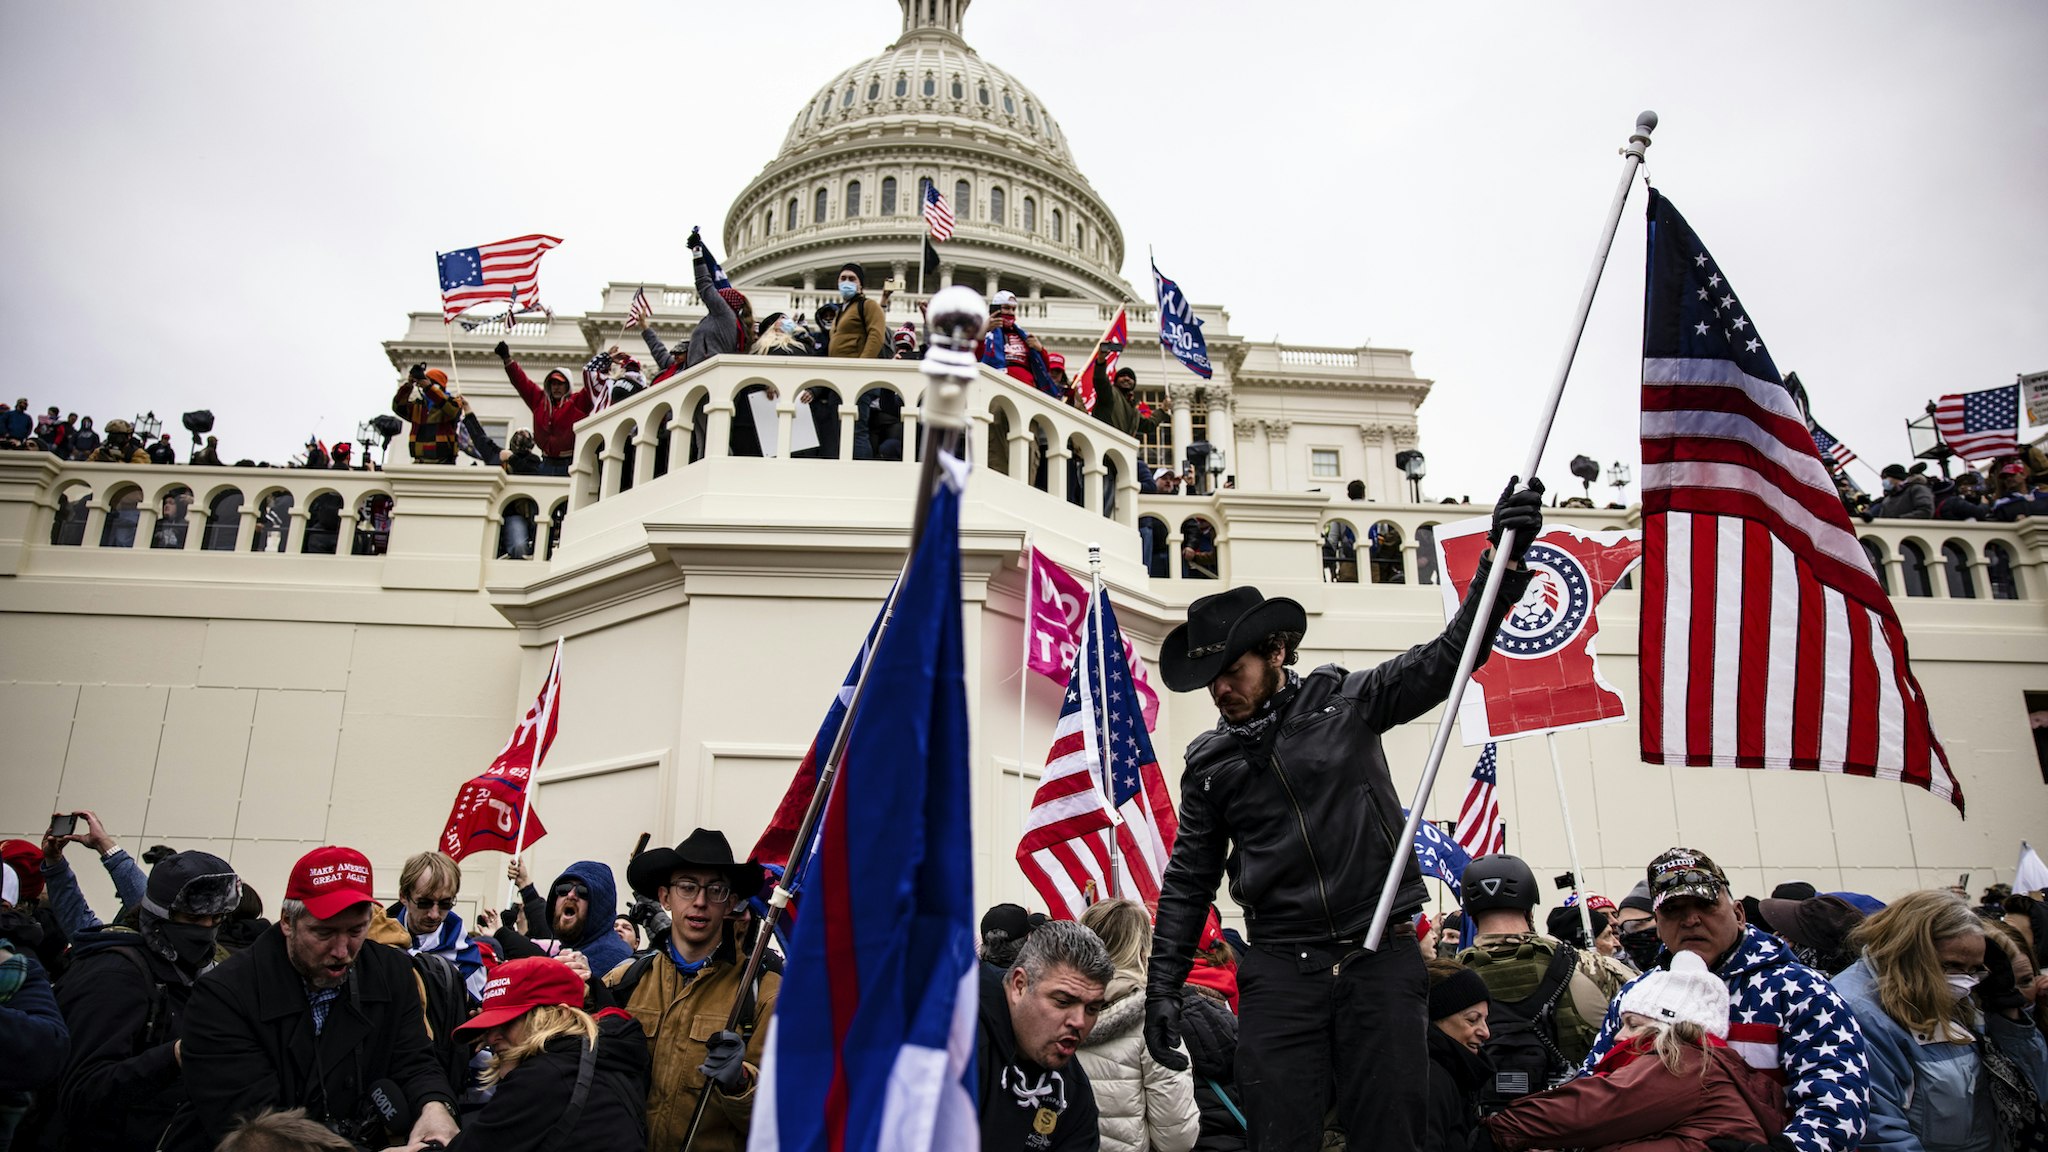 Pro-Trump supporters storm the US Capitol following a rally with President Donald Trump on January 6, 2021 in Washington, DC. Trump supporters gathered in the nation's capital today to protest the ratification of President-elect Joe Biden's Electoral College victory over President Trump in the 2020 election. (Photo by Samuel Corum/Getty Images)